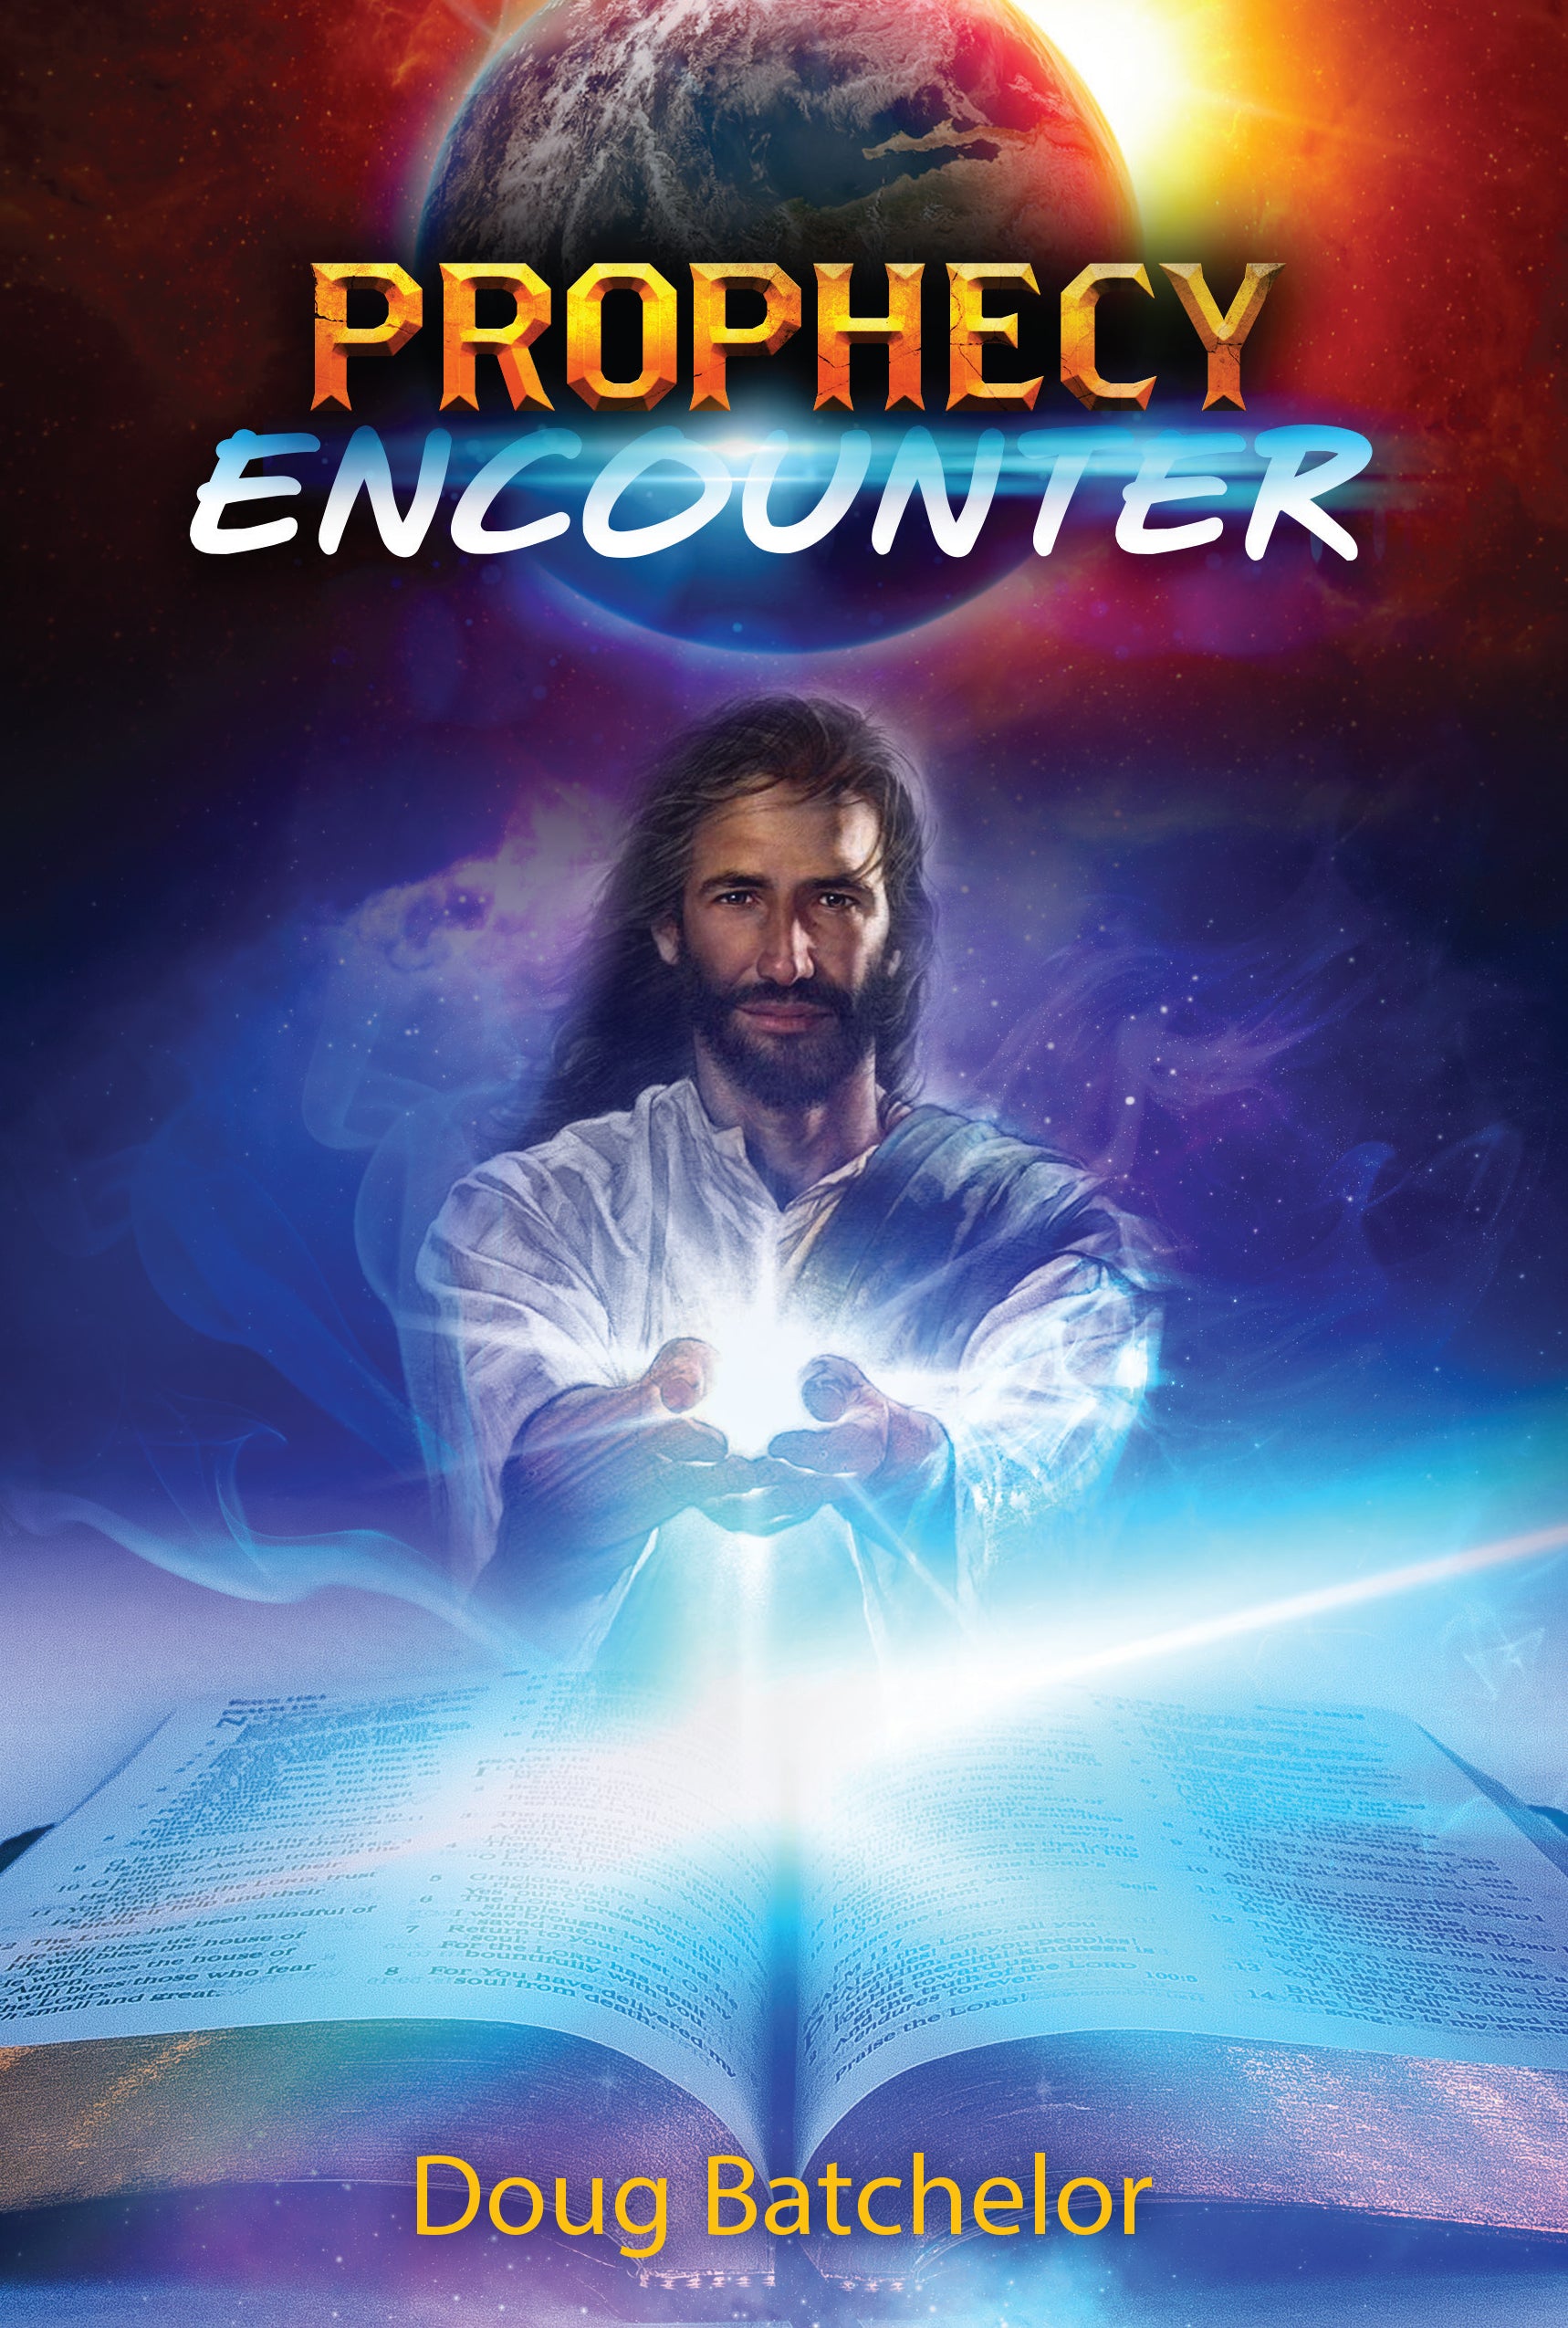 Prophecy Encounter Complete Set (DVDs, Study Guides and Book)